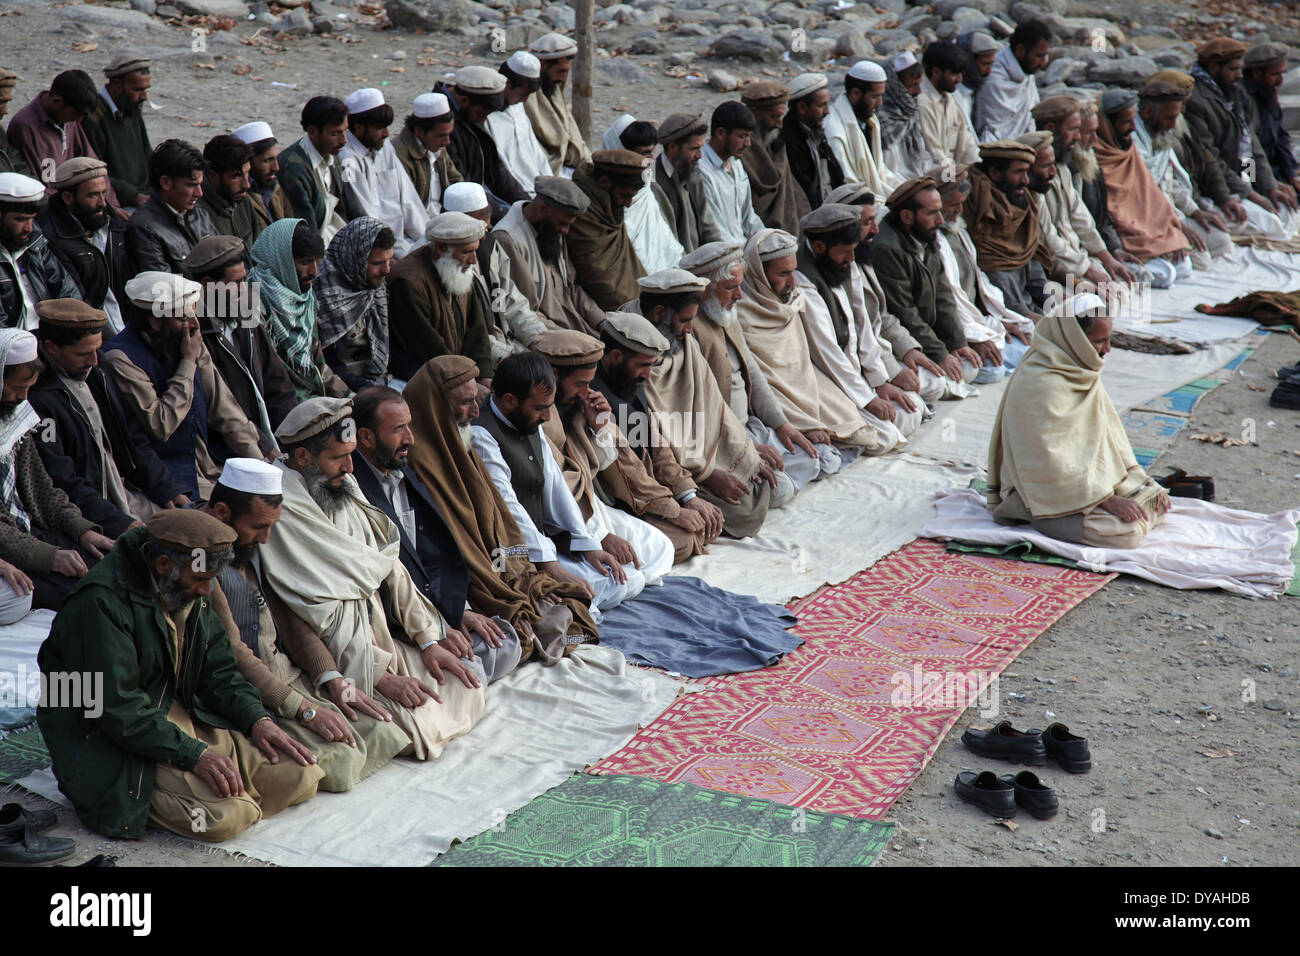 Afghan villagers hold a prayer December 7, 2009 in Lachey village, Shigal district, Kunar province, Afghanistan. Stock Photo